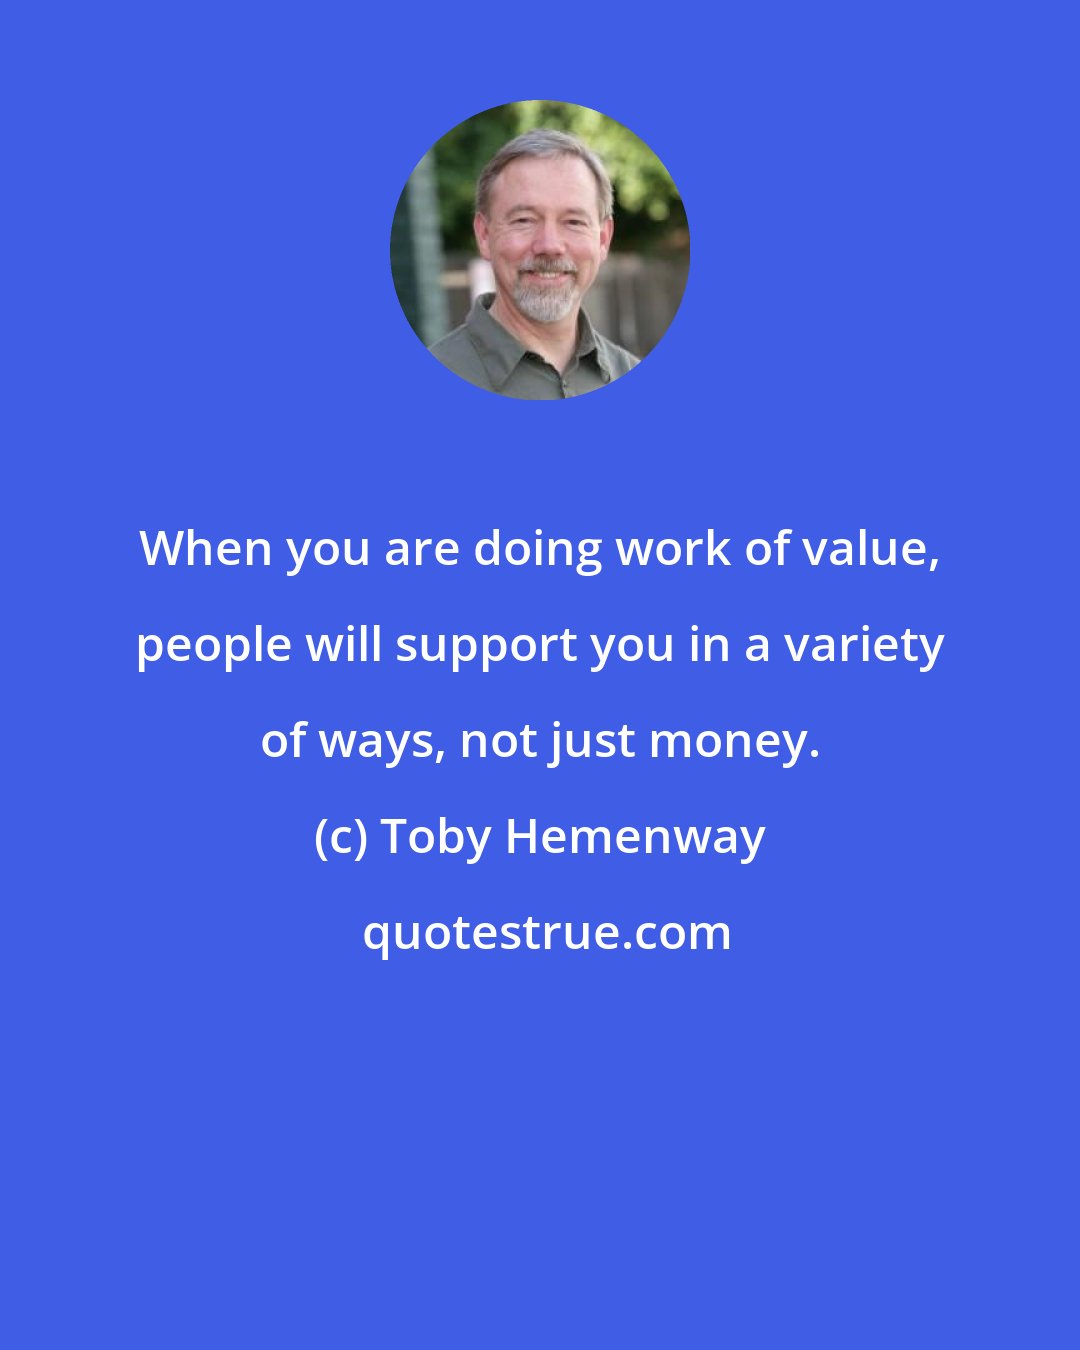 Toby Hemenway: When you are doing work of value, people will support you in a variety of ways, not just money.